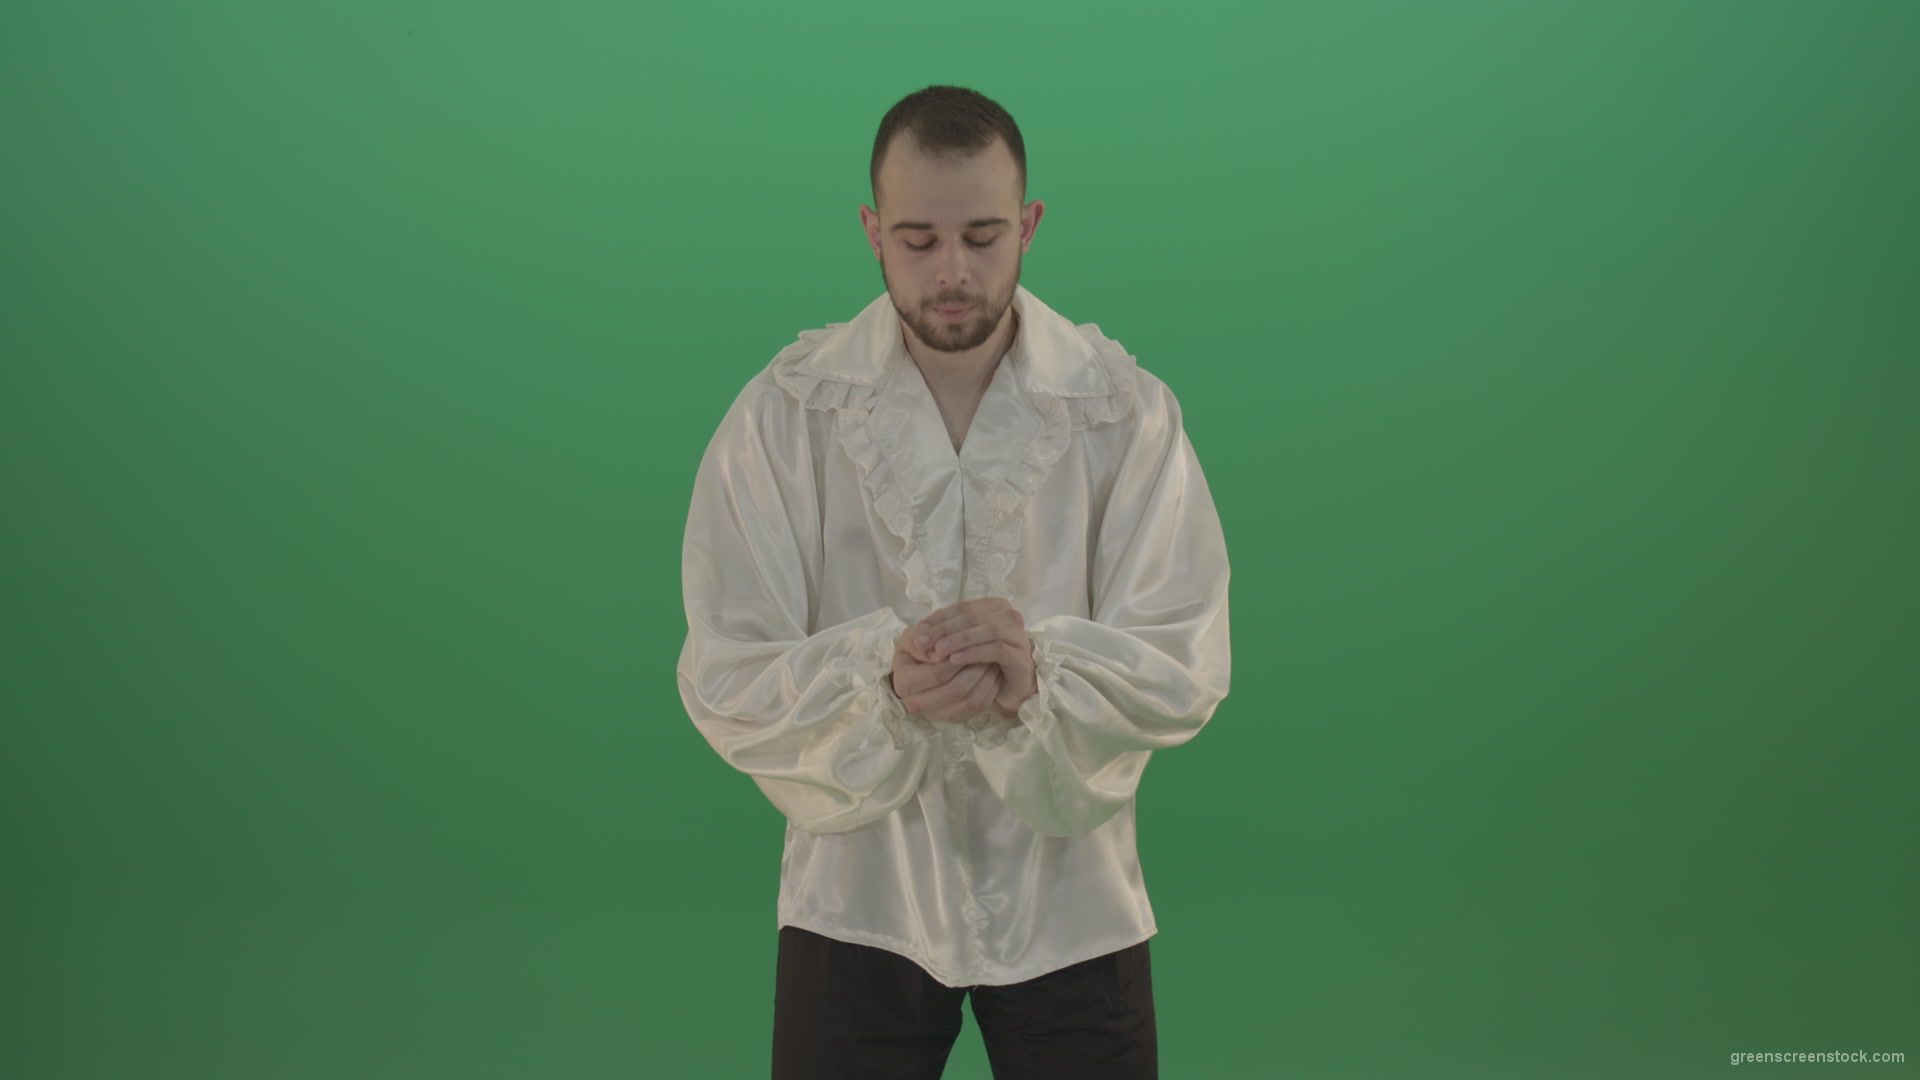 Boy-gives-flower-squeezing-in-the-sleeves-elegantly-in-hand-isolated-on-green-screen_002 Green Screen Stock